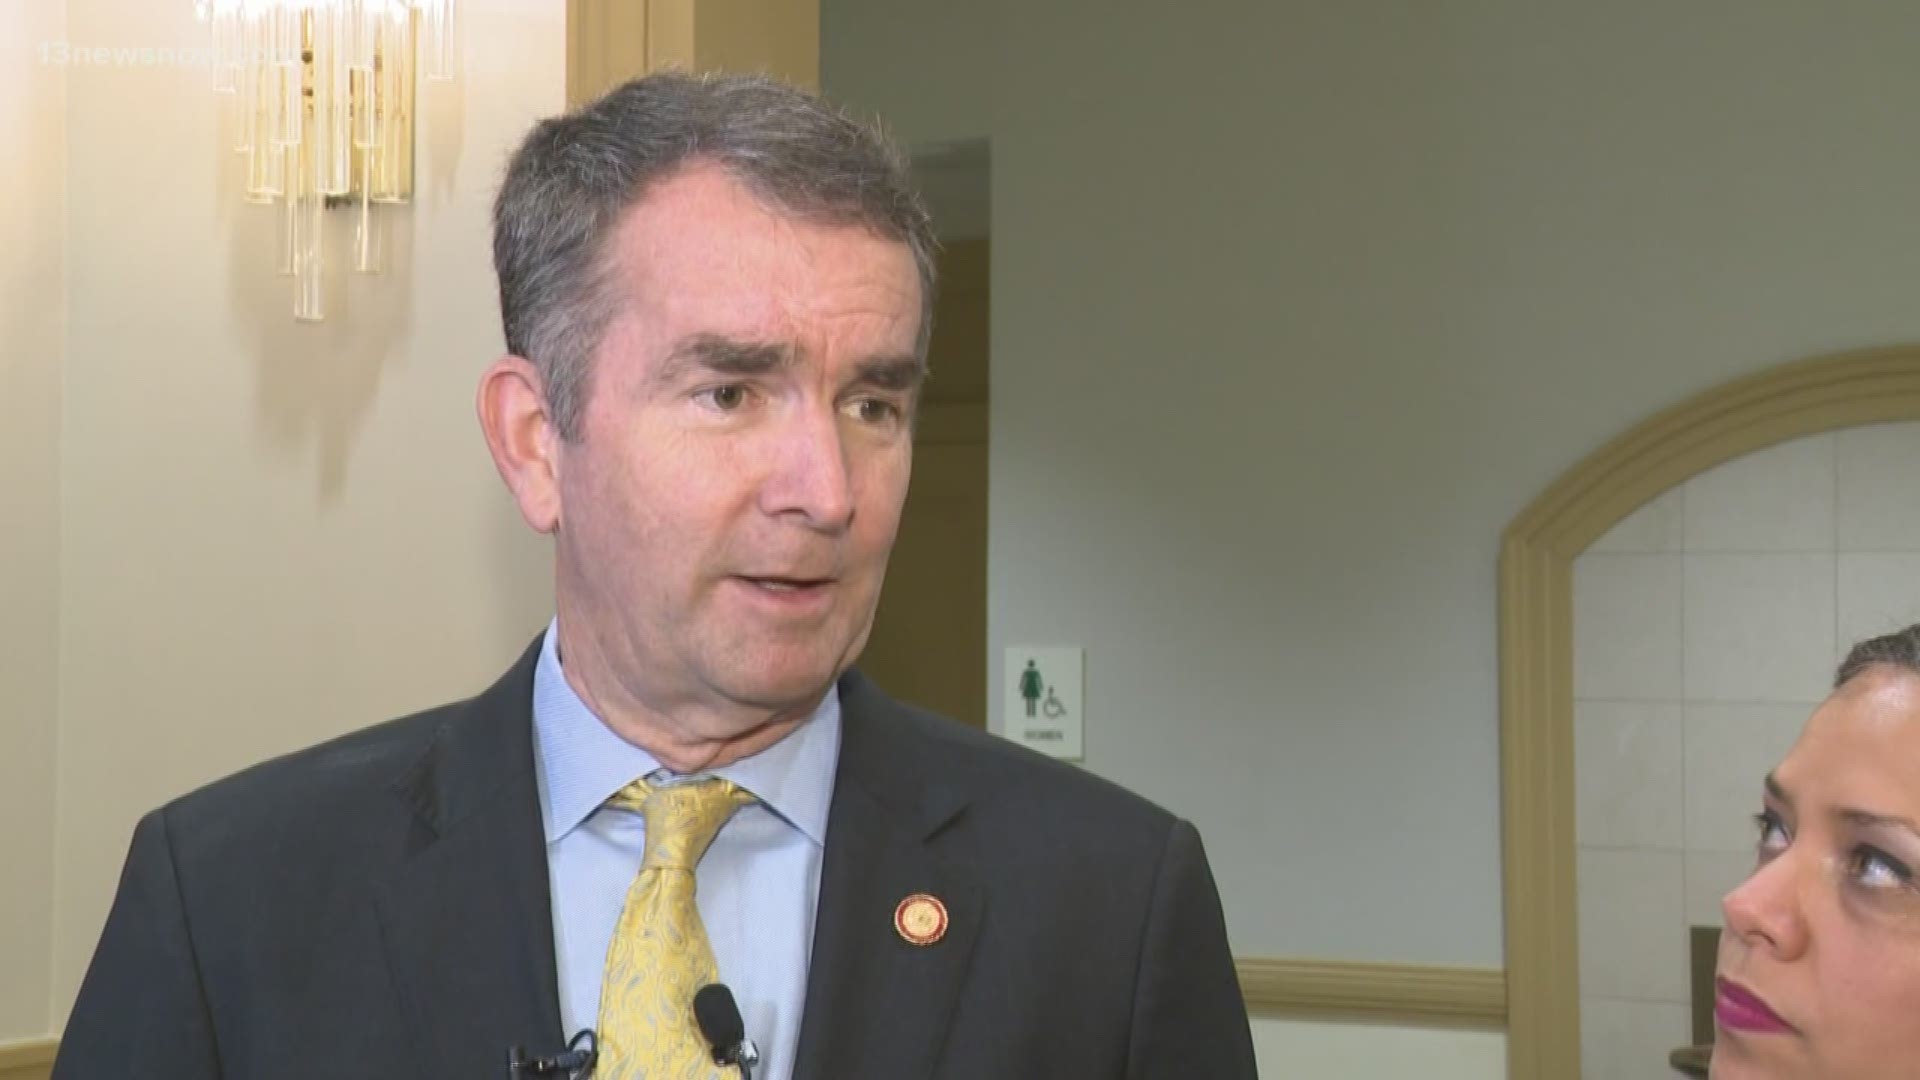 Gov. Ralph Northam welcomed the passage of gun control bills as 'historic' after a House committee voted to push the legislation forward.